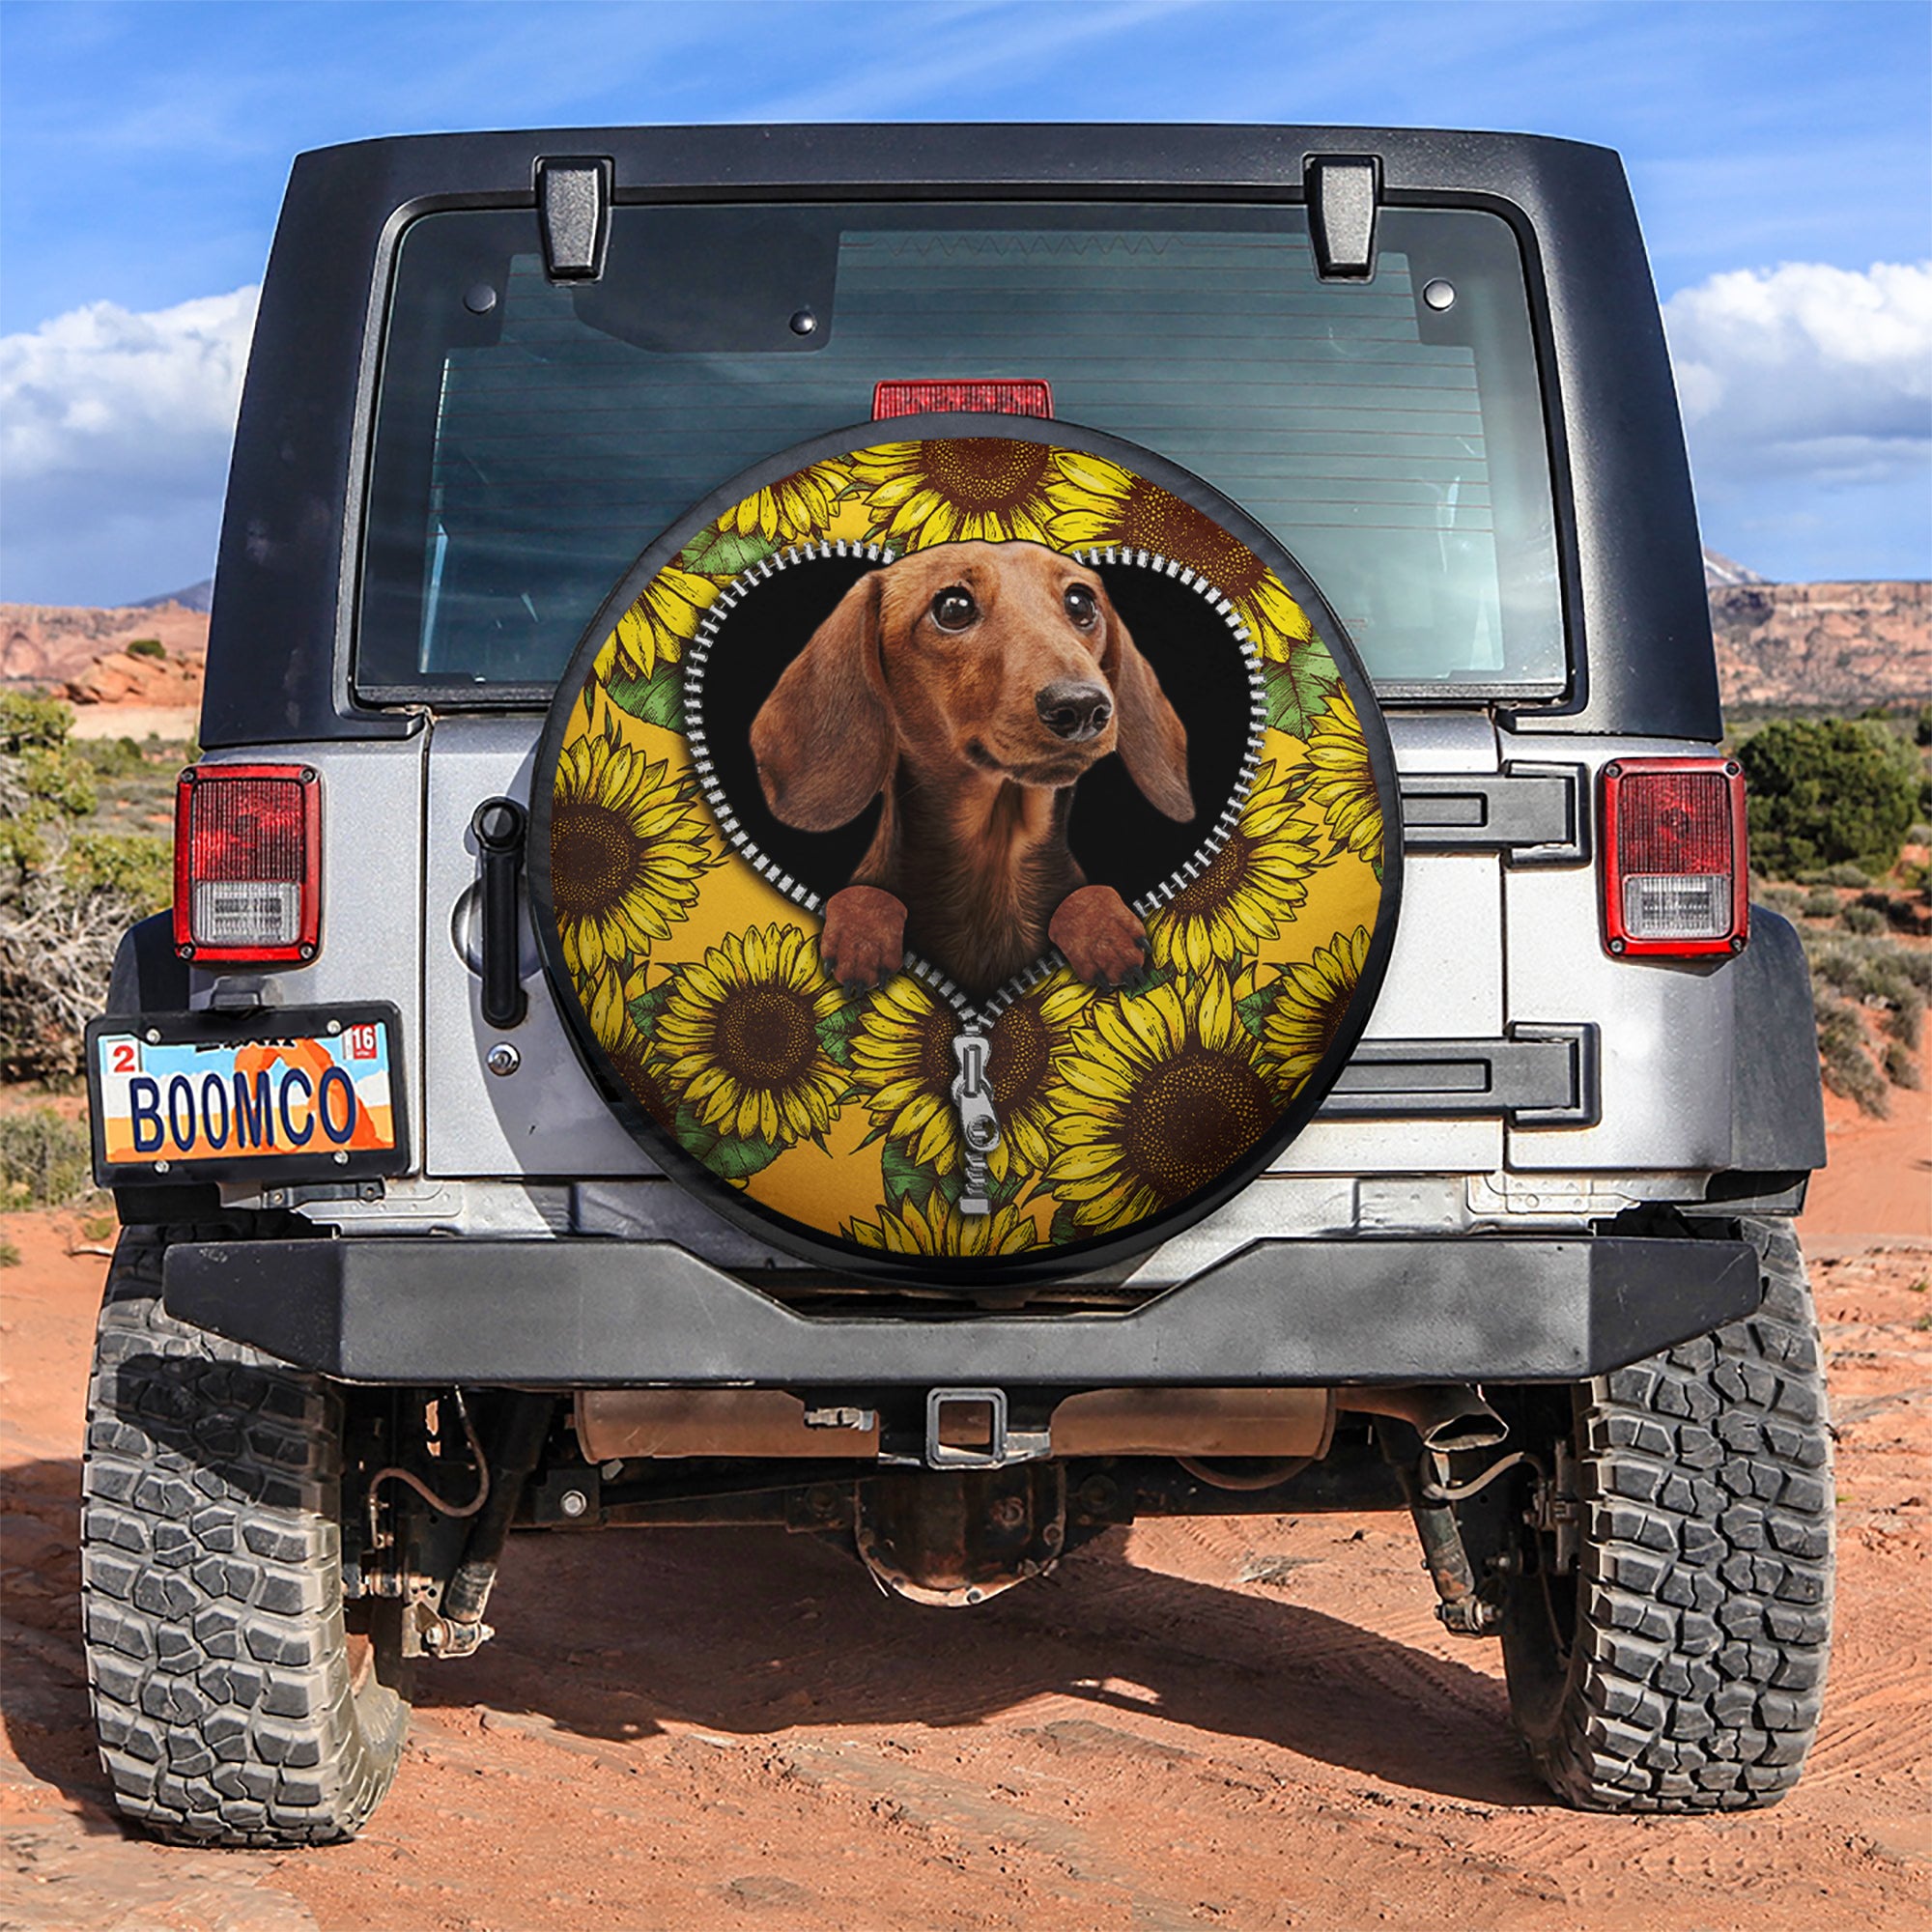 Sunflower Brown Dachshund Zipper Car Spare Tire Covers Gift For Campers Nearkii